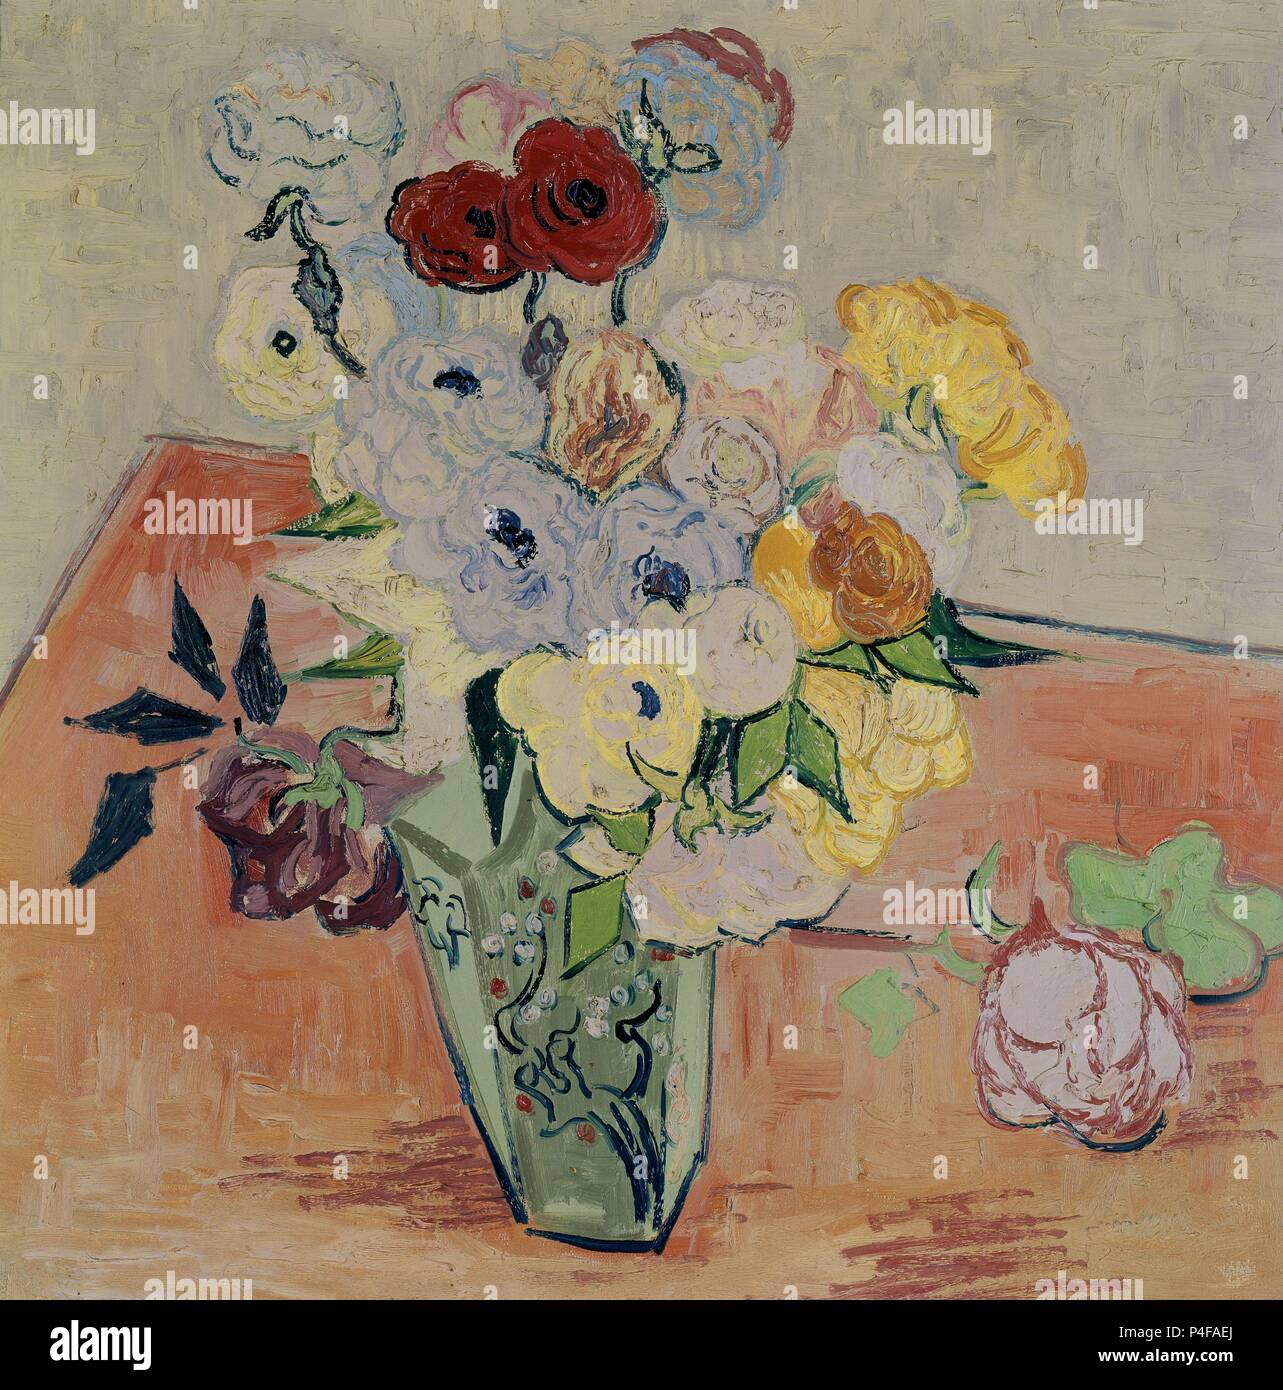 Roses and Anemones - 1890 - 51,7x52 cm - oil on canvas. Author: Vincent van Gogh (1853-1890). Location: MUSEE D'ORSAY, FRANCE. Also known as: ROSAS Y ANEMONAS. Stock Photo